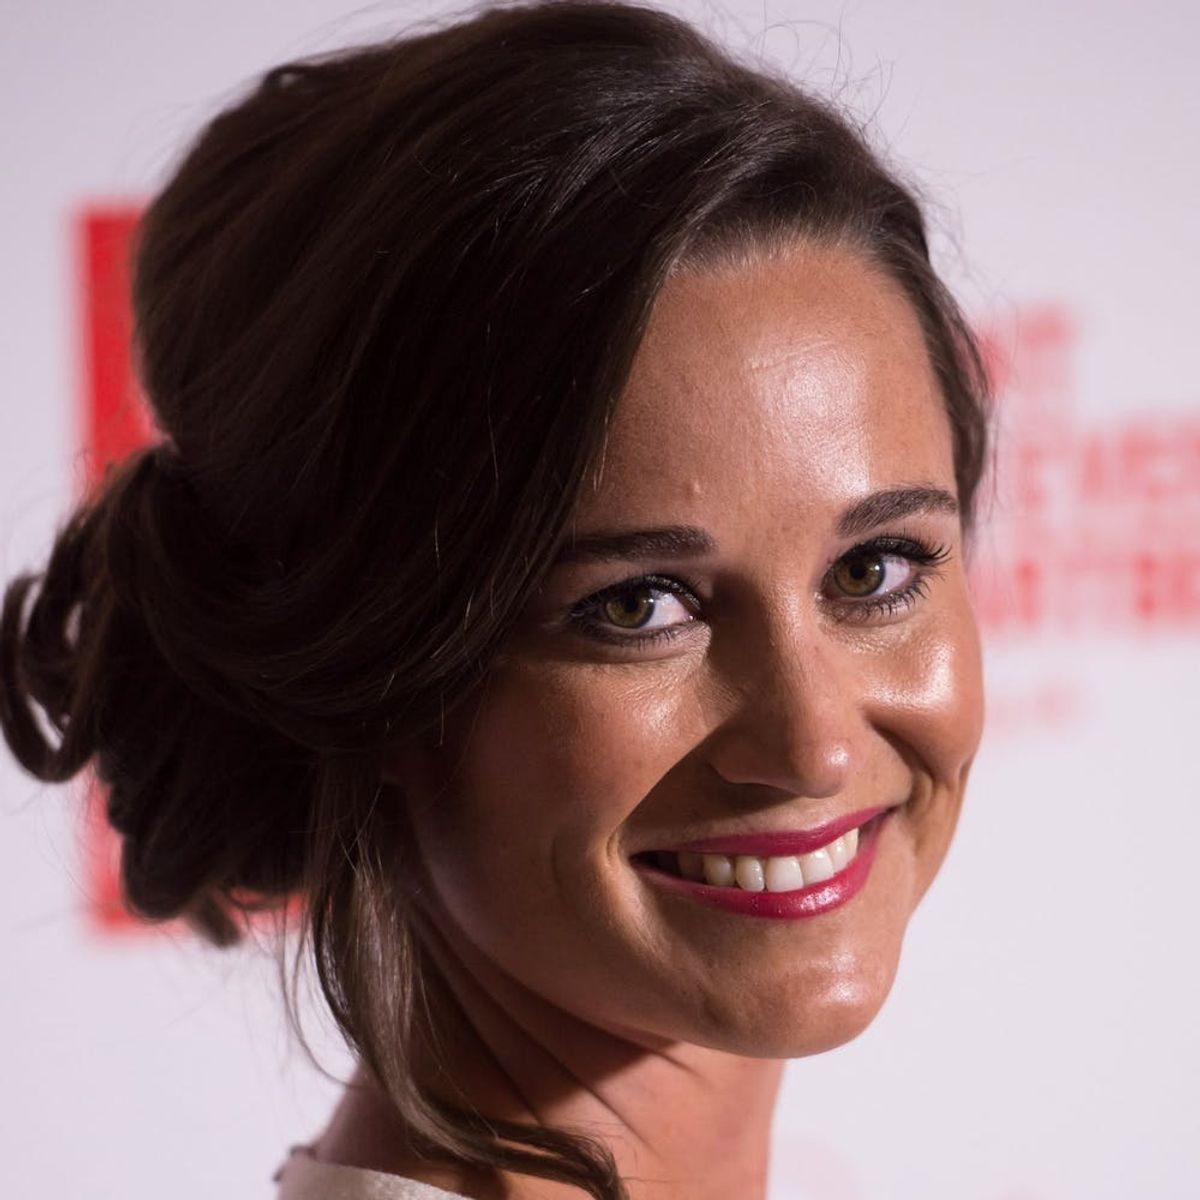 Pippa Middleton’s Wedding Date Has Been Revealed